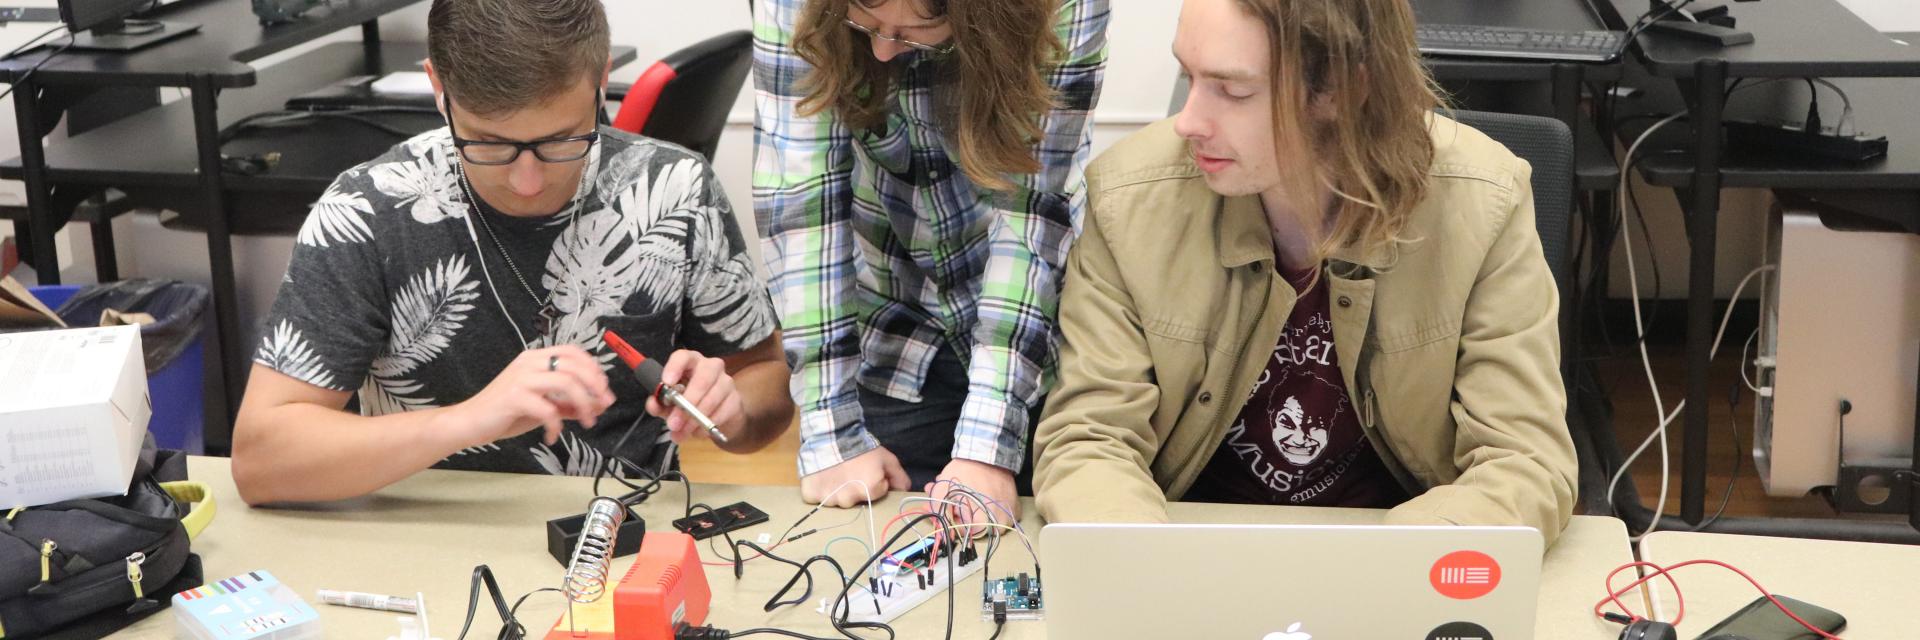 Three students working on creating a project for a class using a soldering kit and other tools.